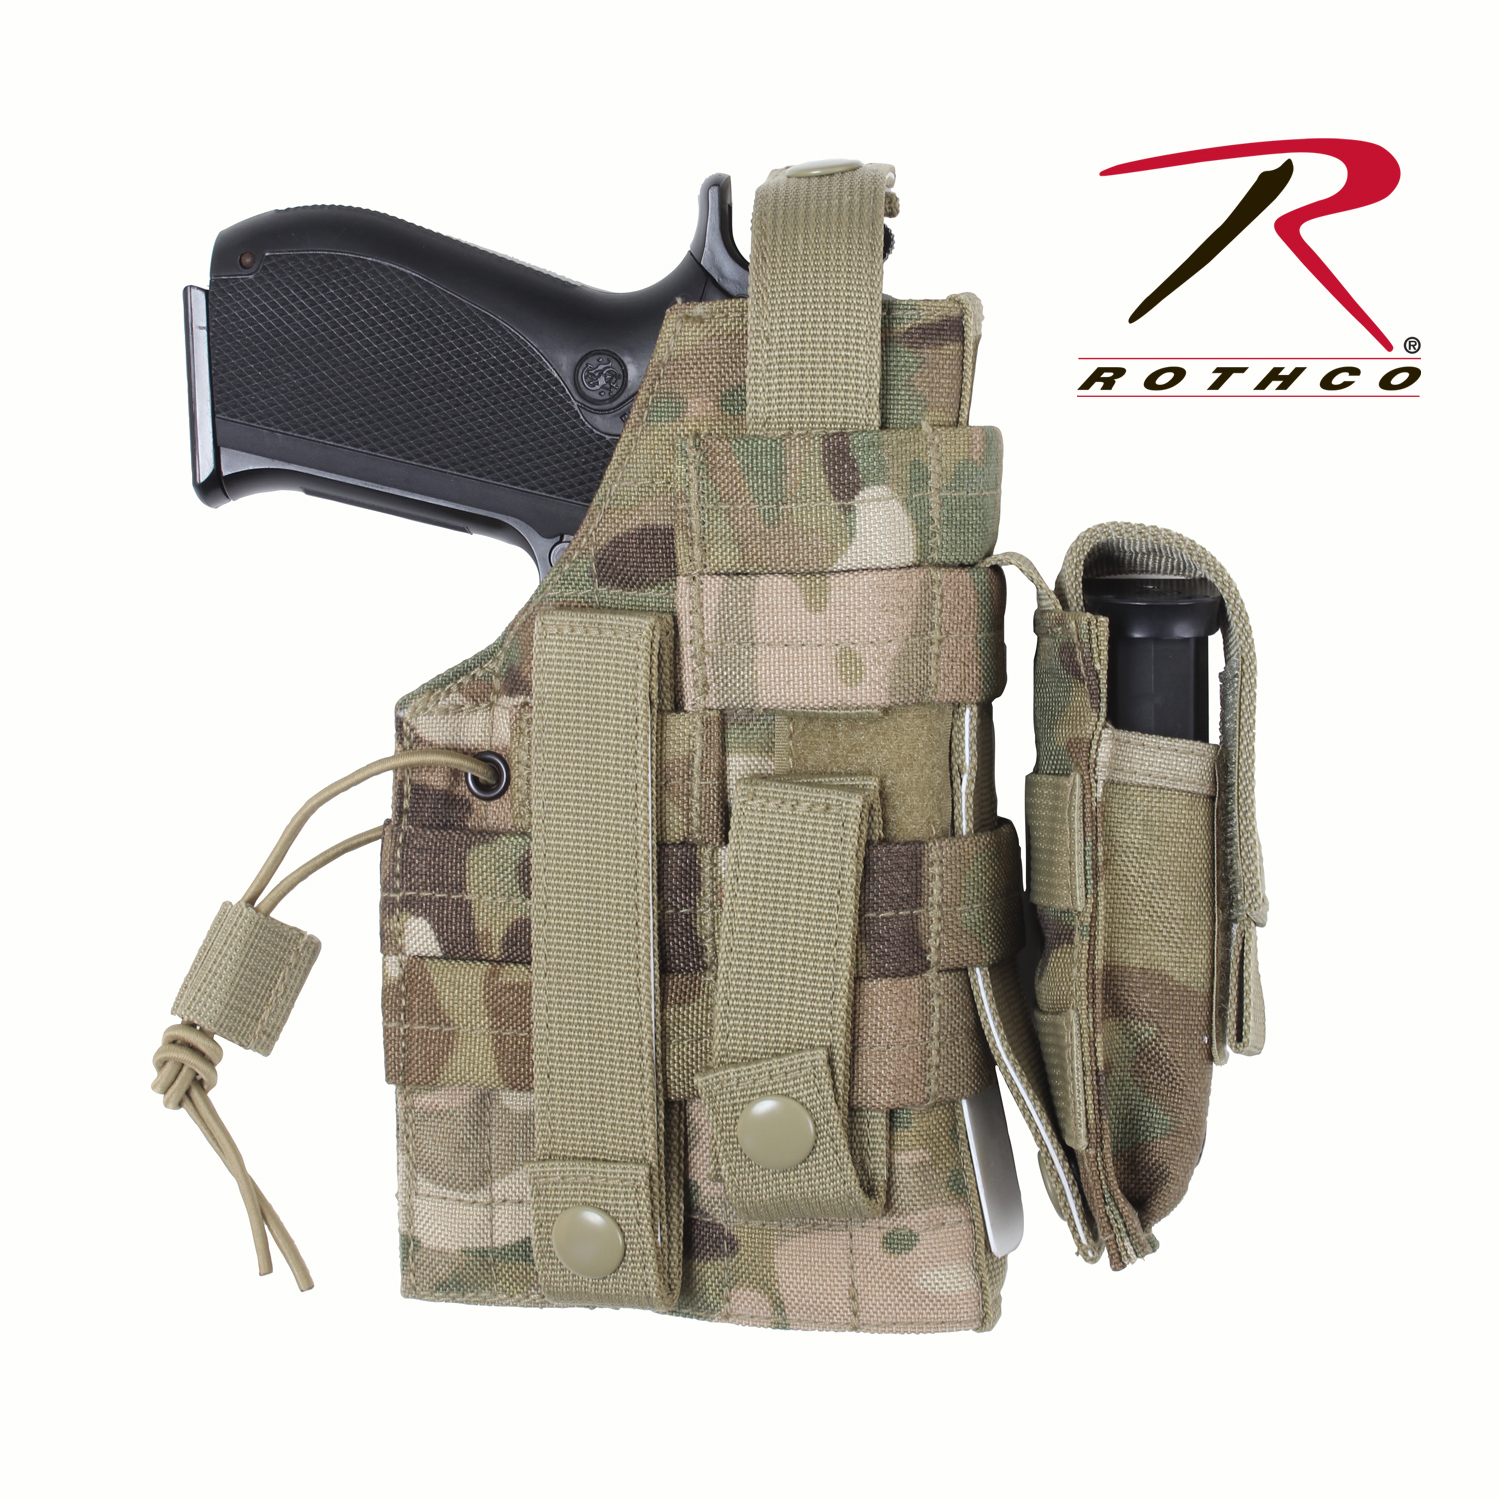 MOLLE Modular Ambidextrous Holster MultiCam – Kind of Outdoorsy